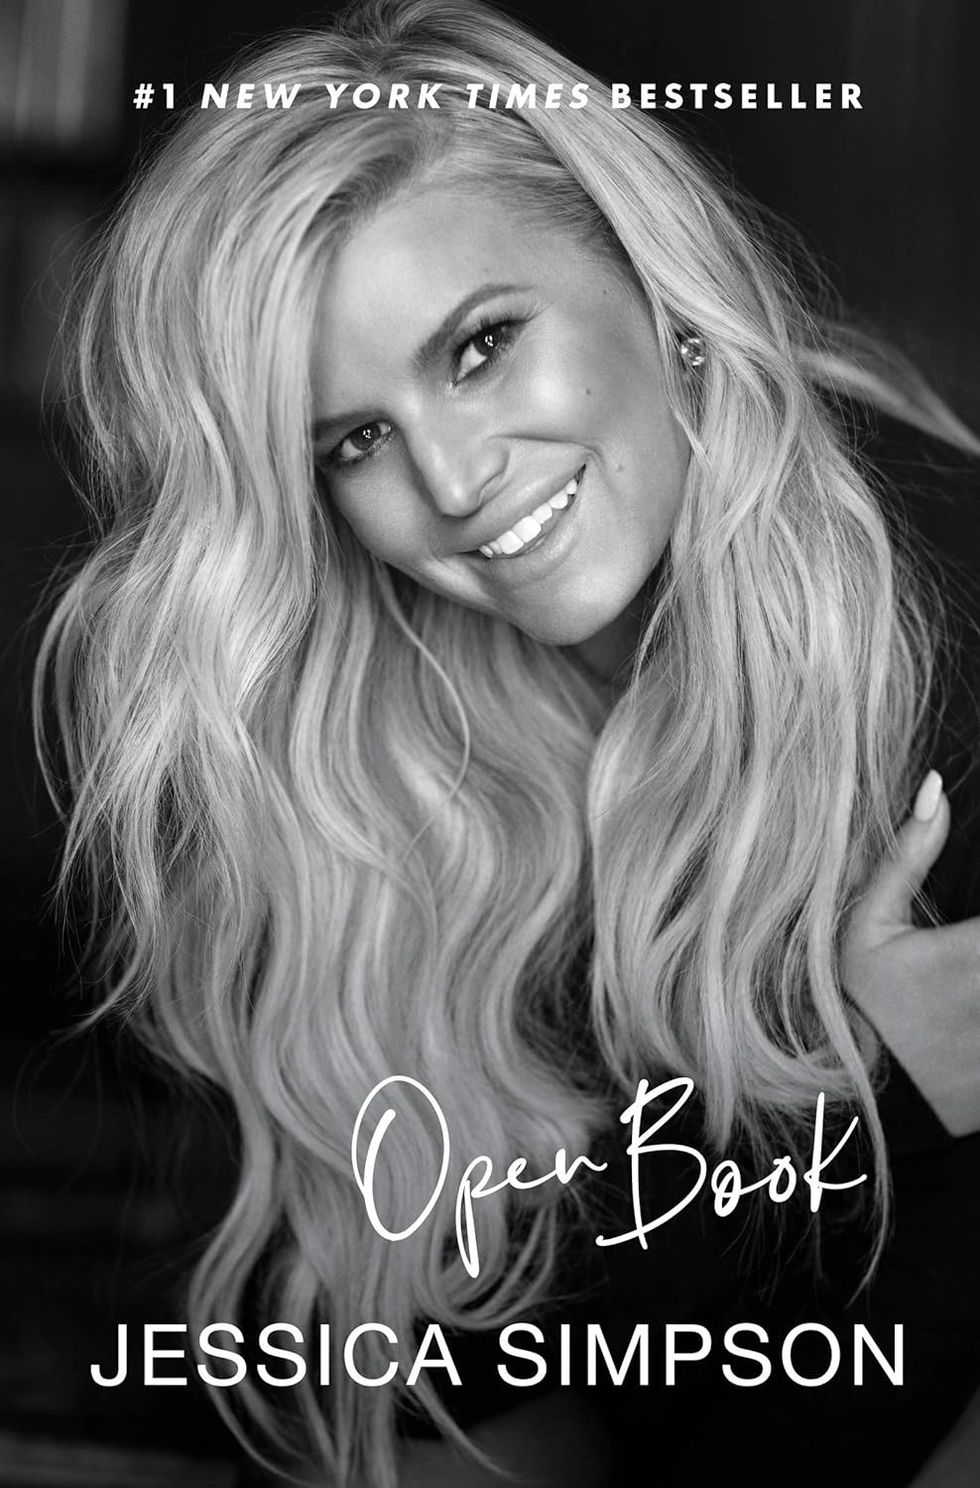 "Open Book" by Jessica Simpson